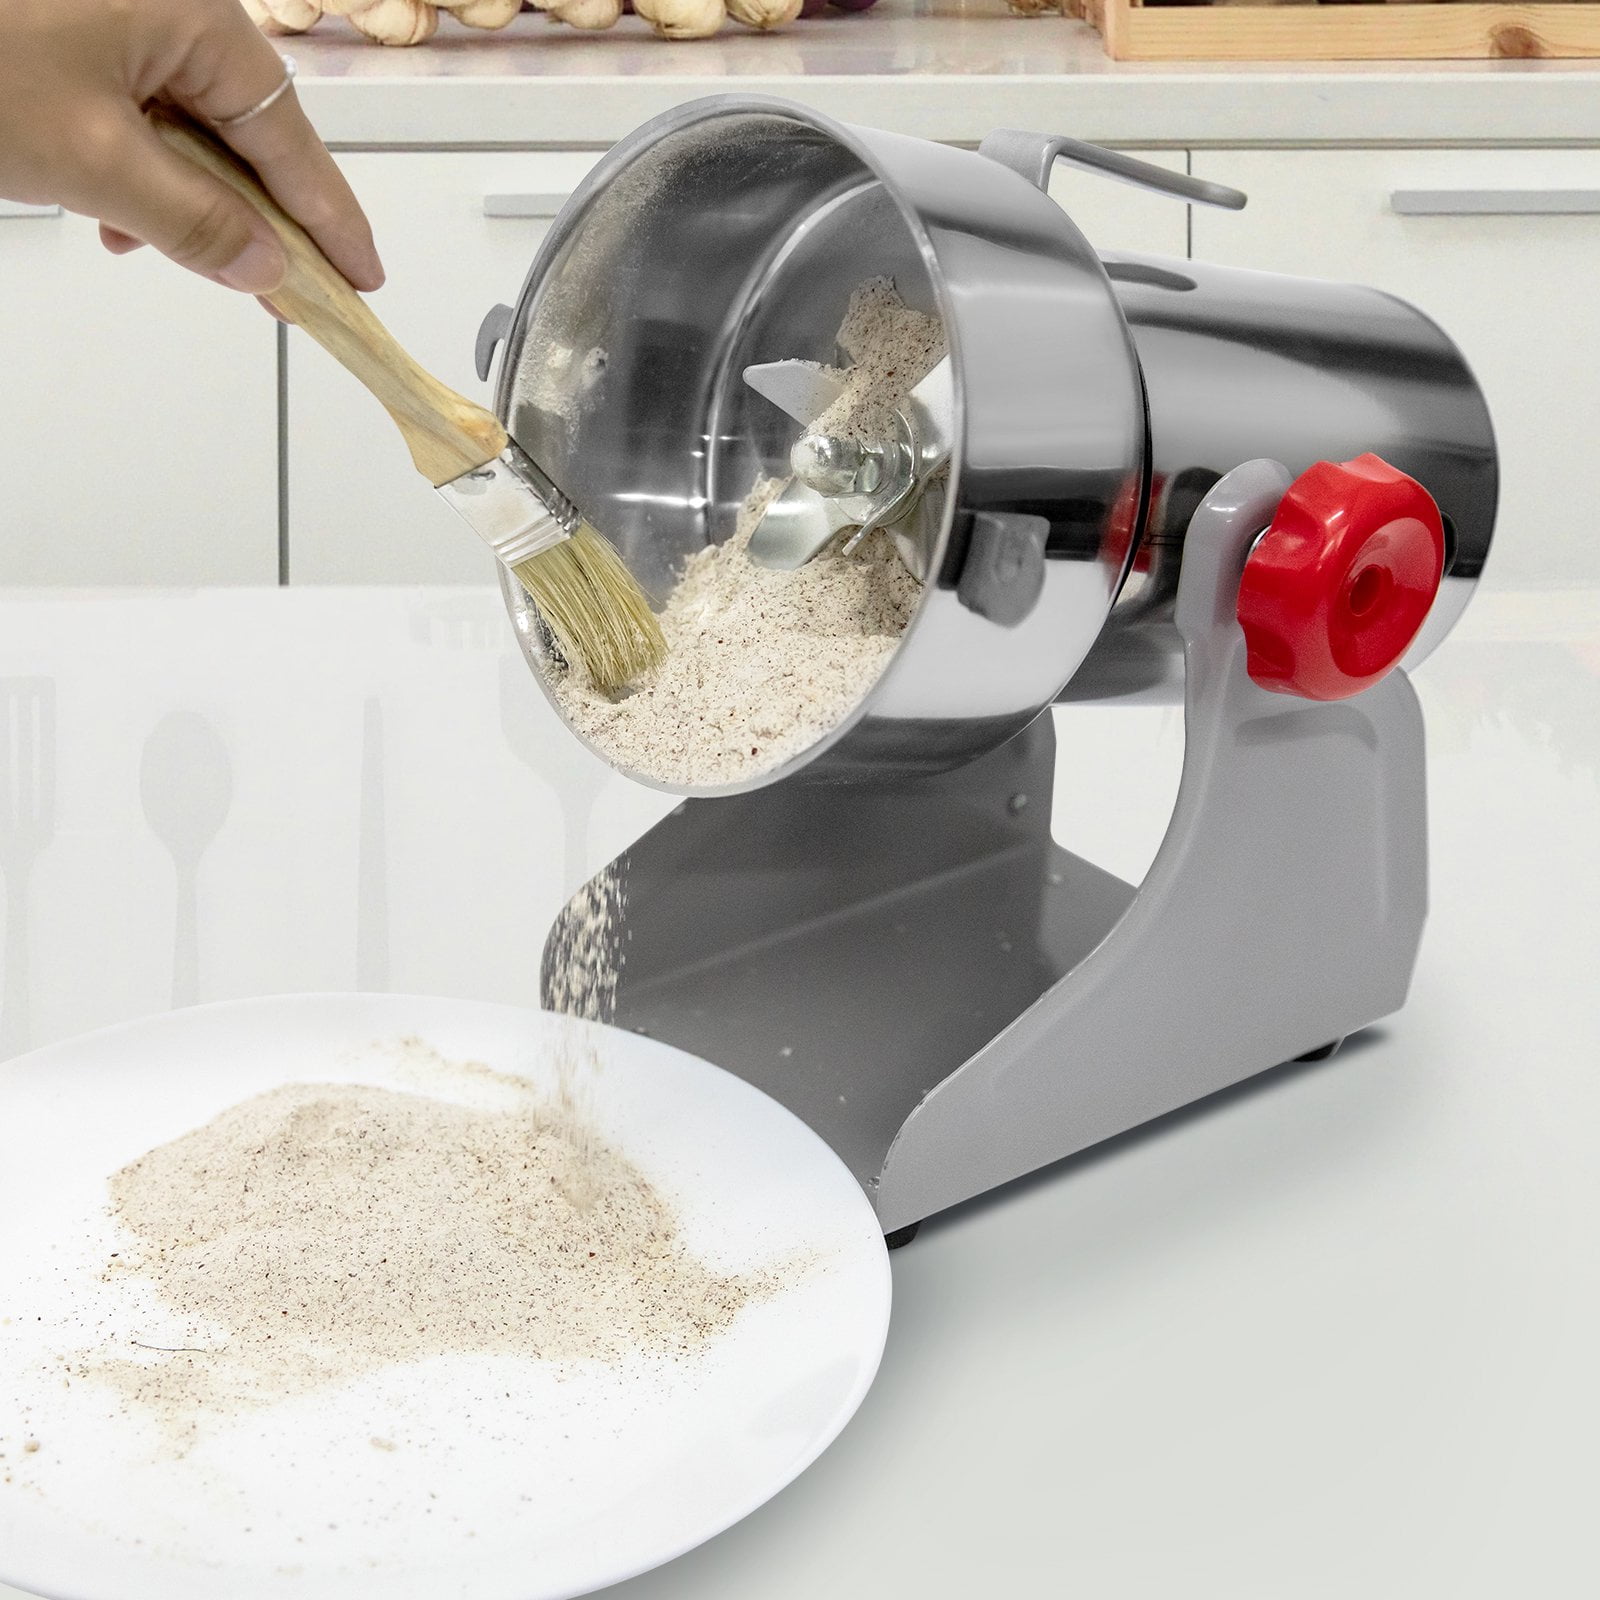 Domccy® 750g Commercial Spice Grinder Electric Grain Mill Grinder